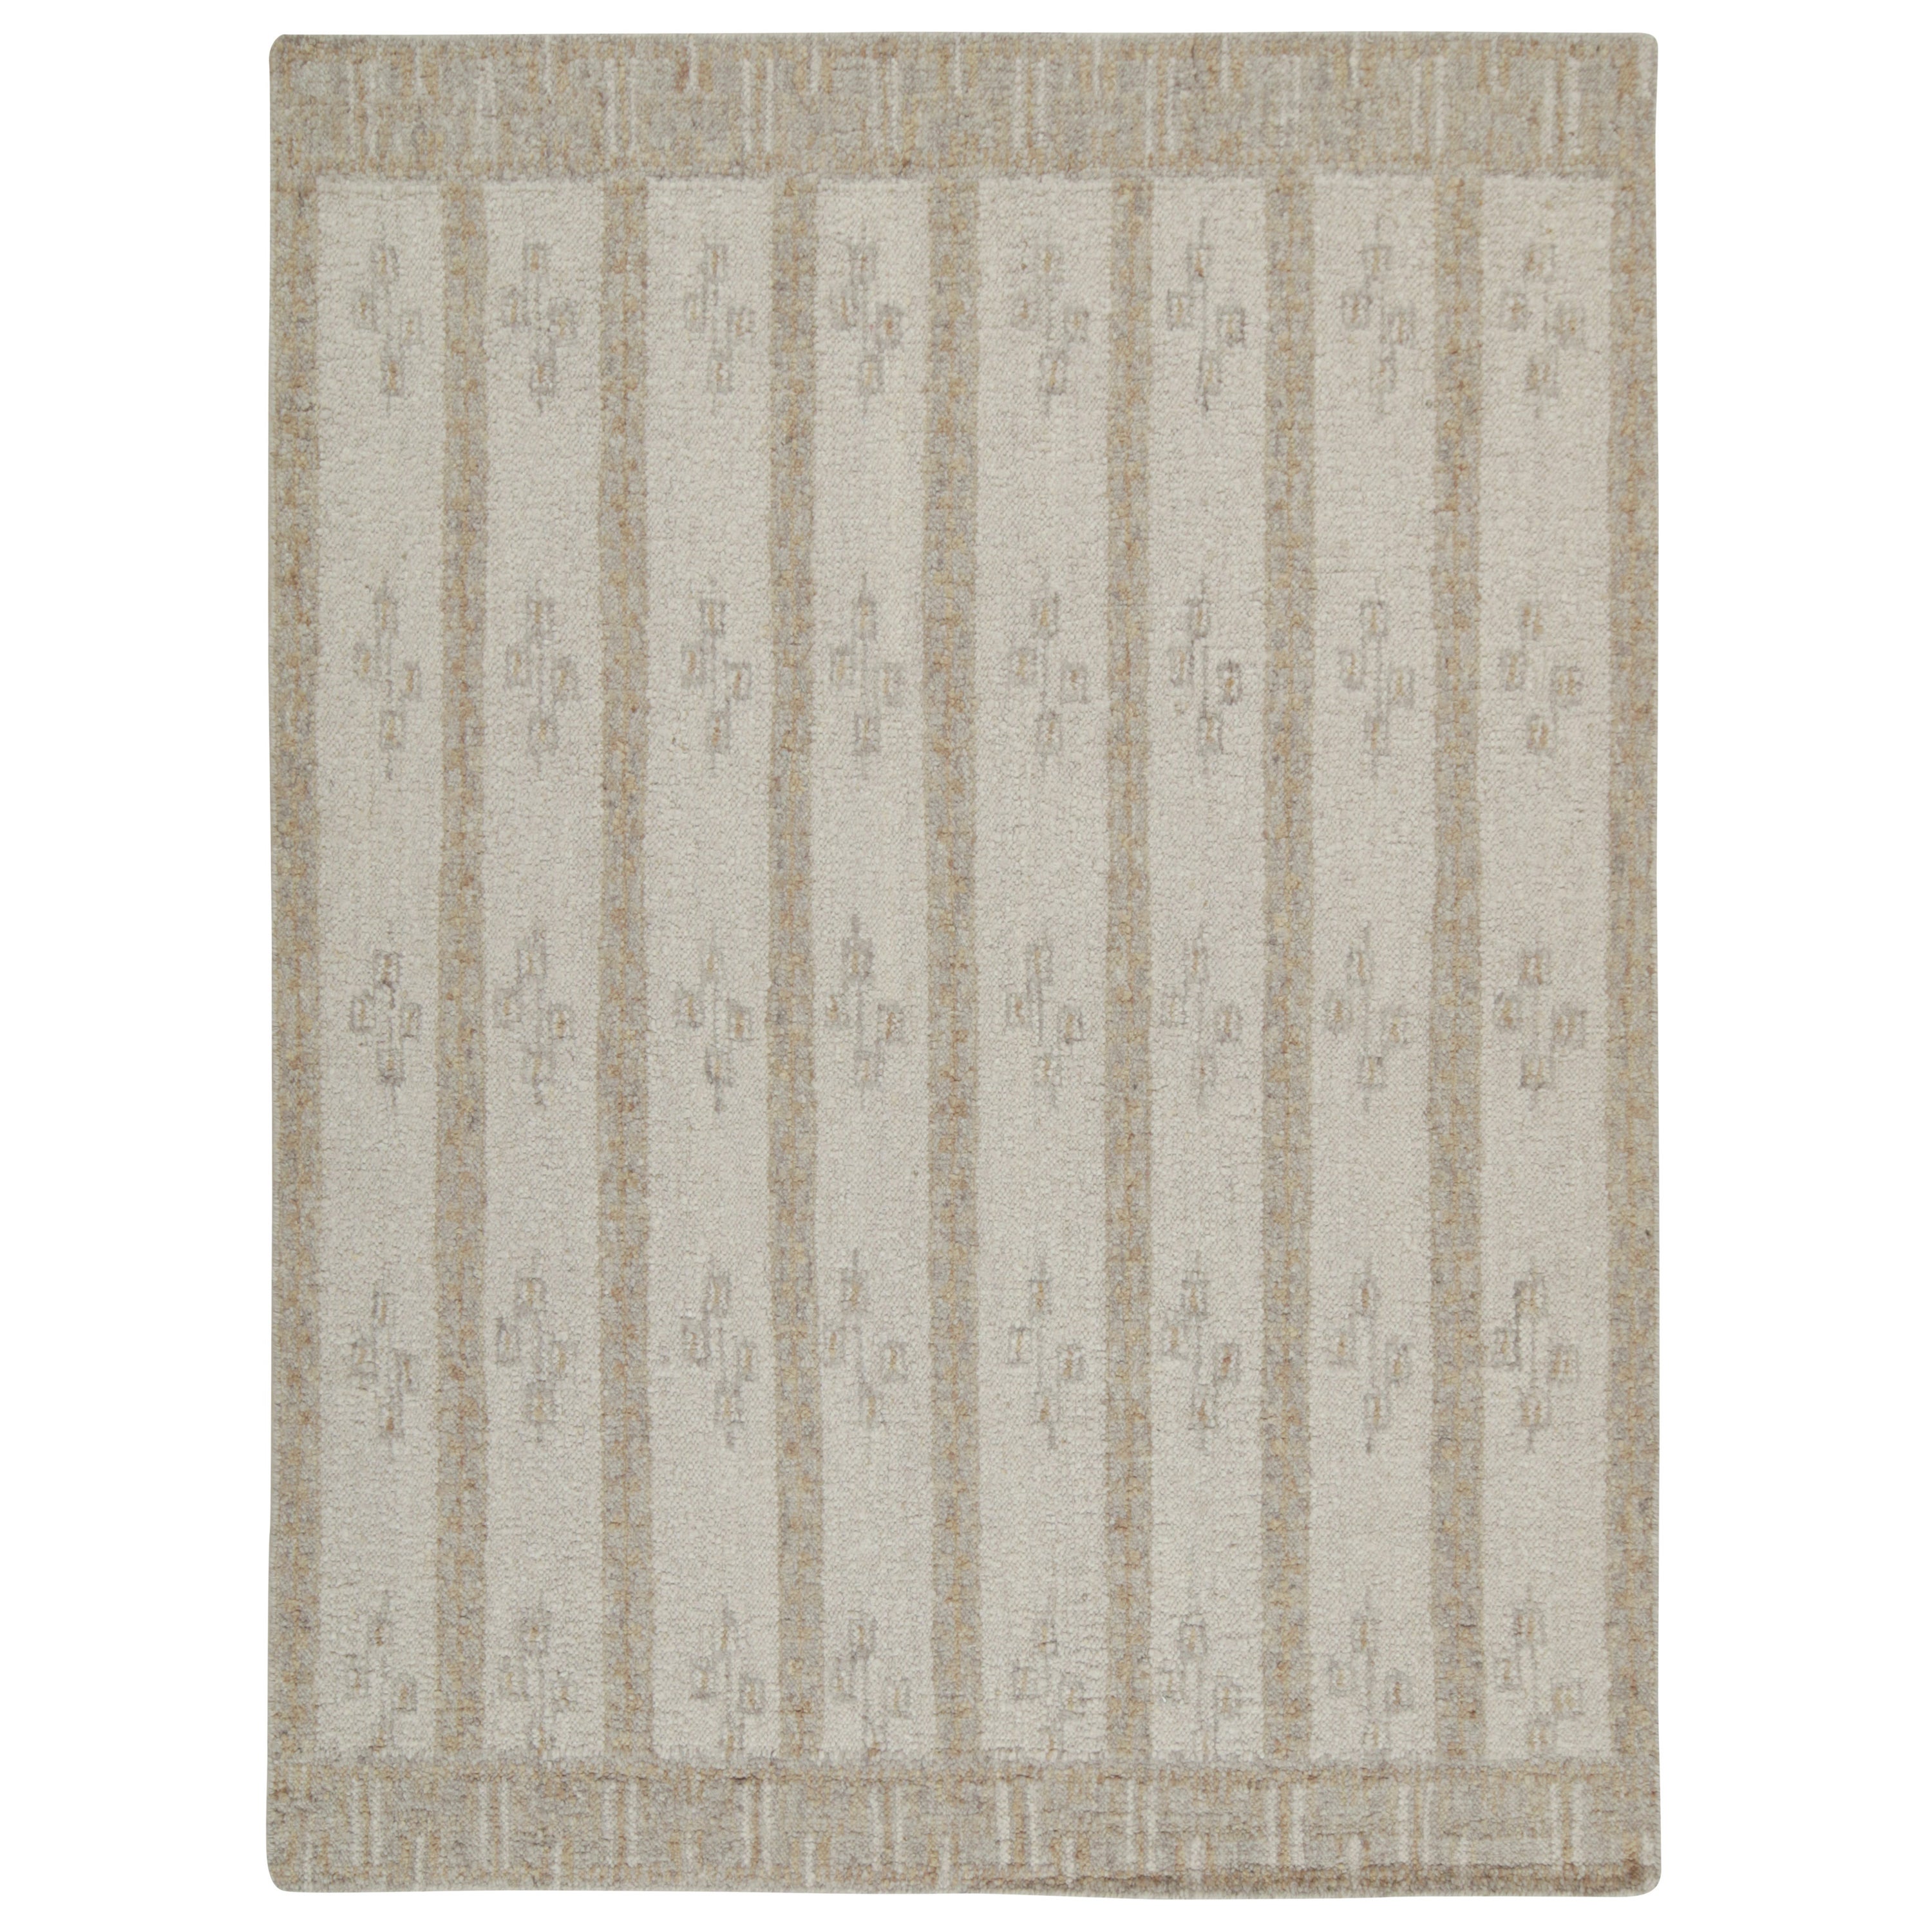 Rug & Kilim’s Scandinavian Style Kilim with Greige and Off-White Stripes